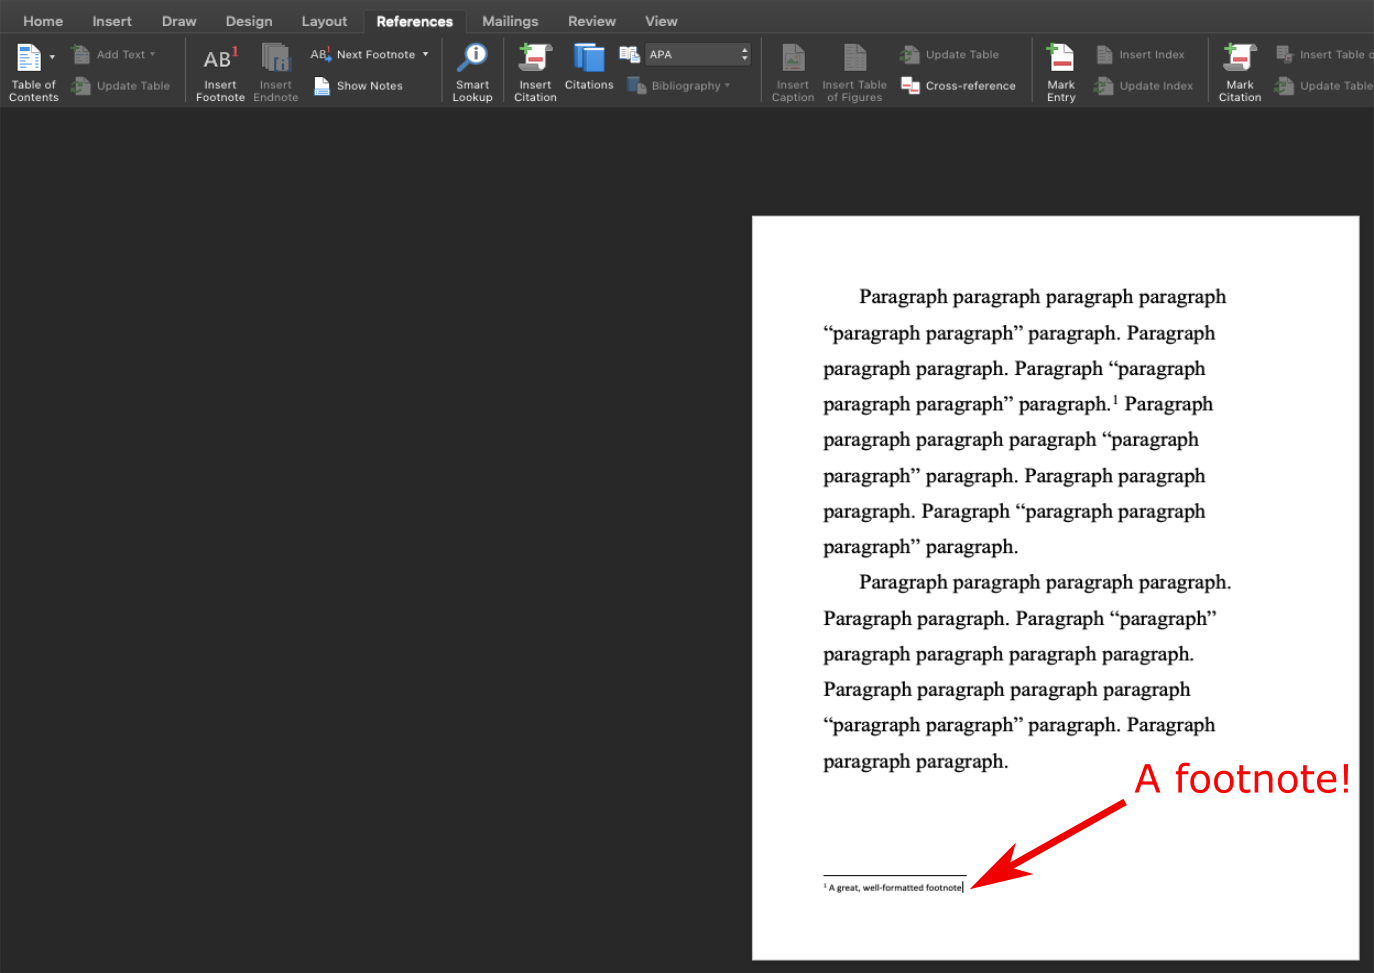 This image shows a screenshot of the same word document of the previous two images, but now a footnote has been added. A superscript "1" has been inserted where the cursor was in the previous image, and a footnote with citation information is at the bottom of the page. The footnote is emphasized with a red arrow and a note that reads "A footnote!"